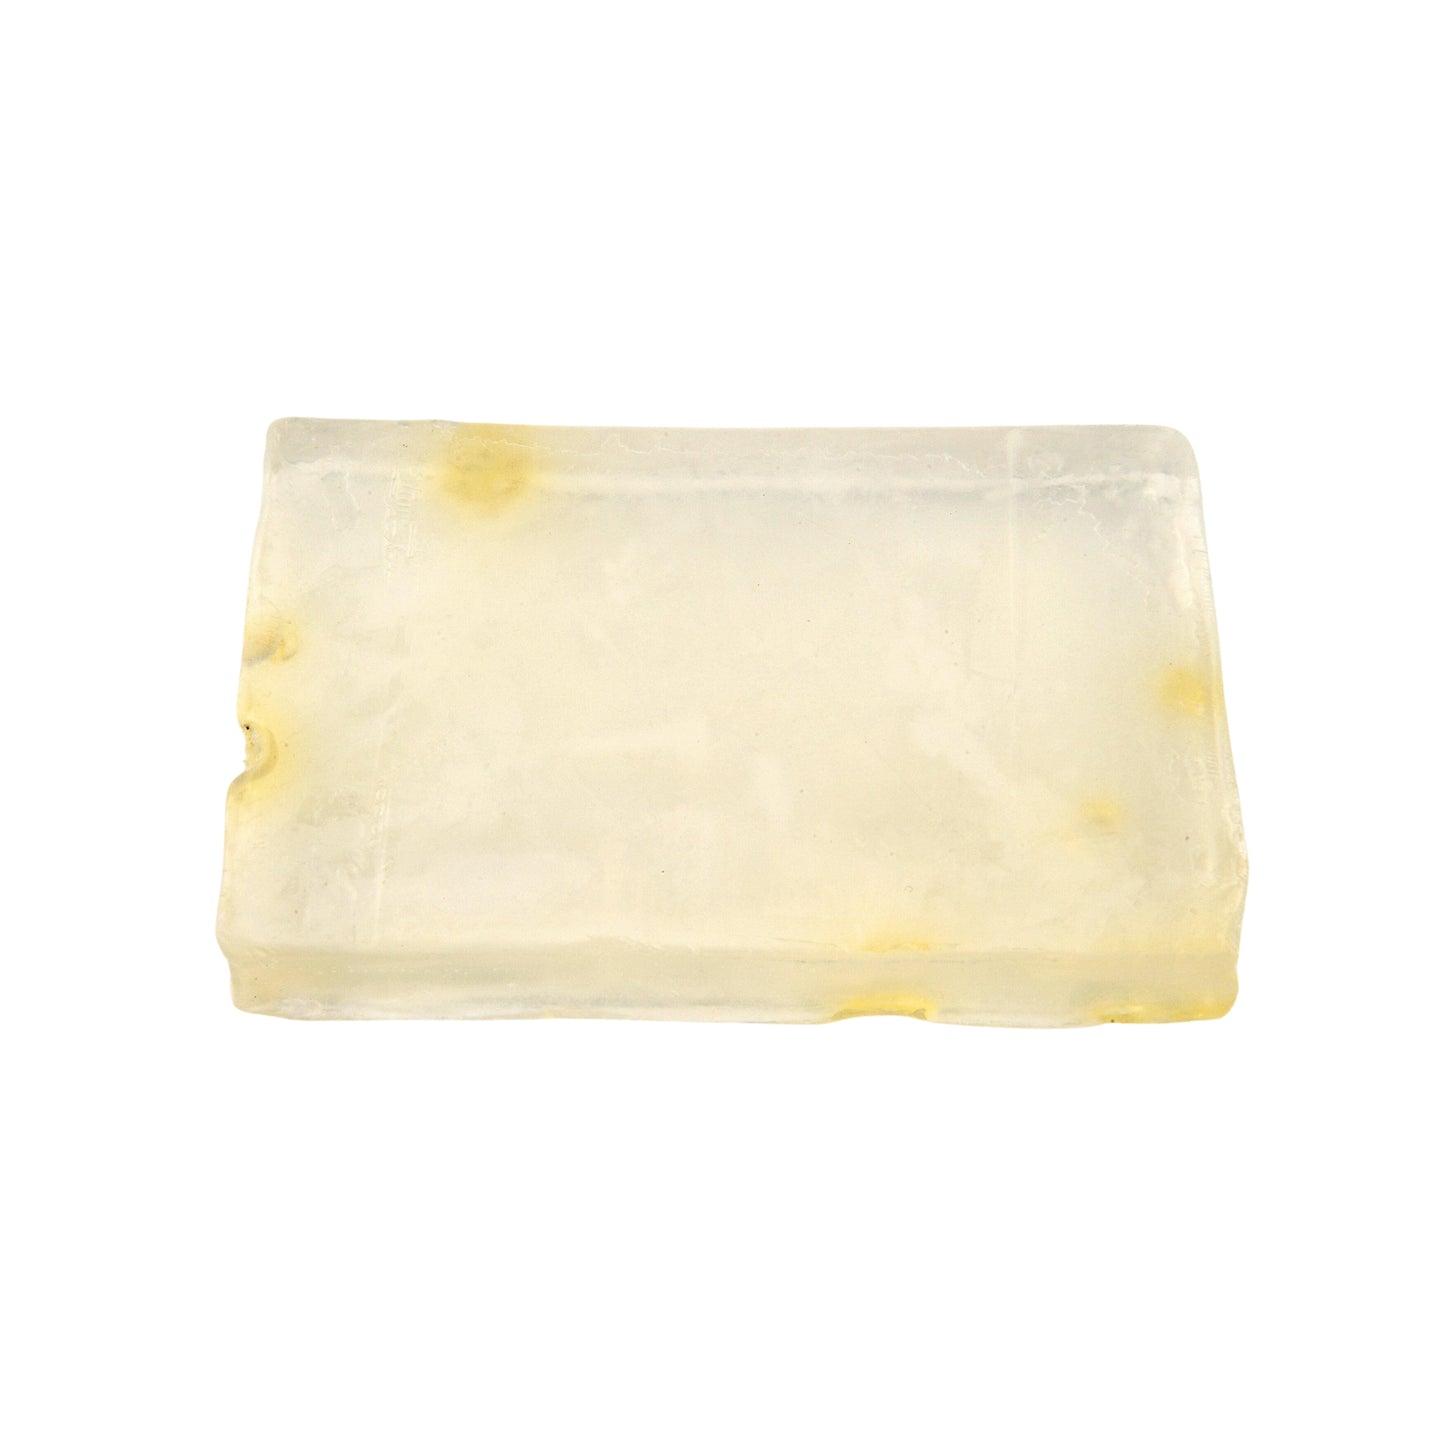 Soap with chamomile - 100g